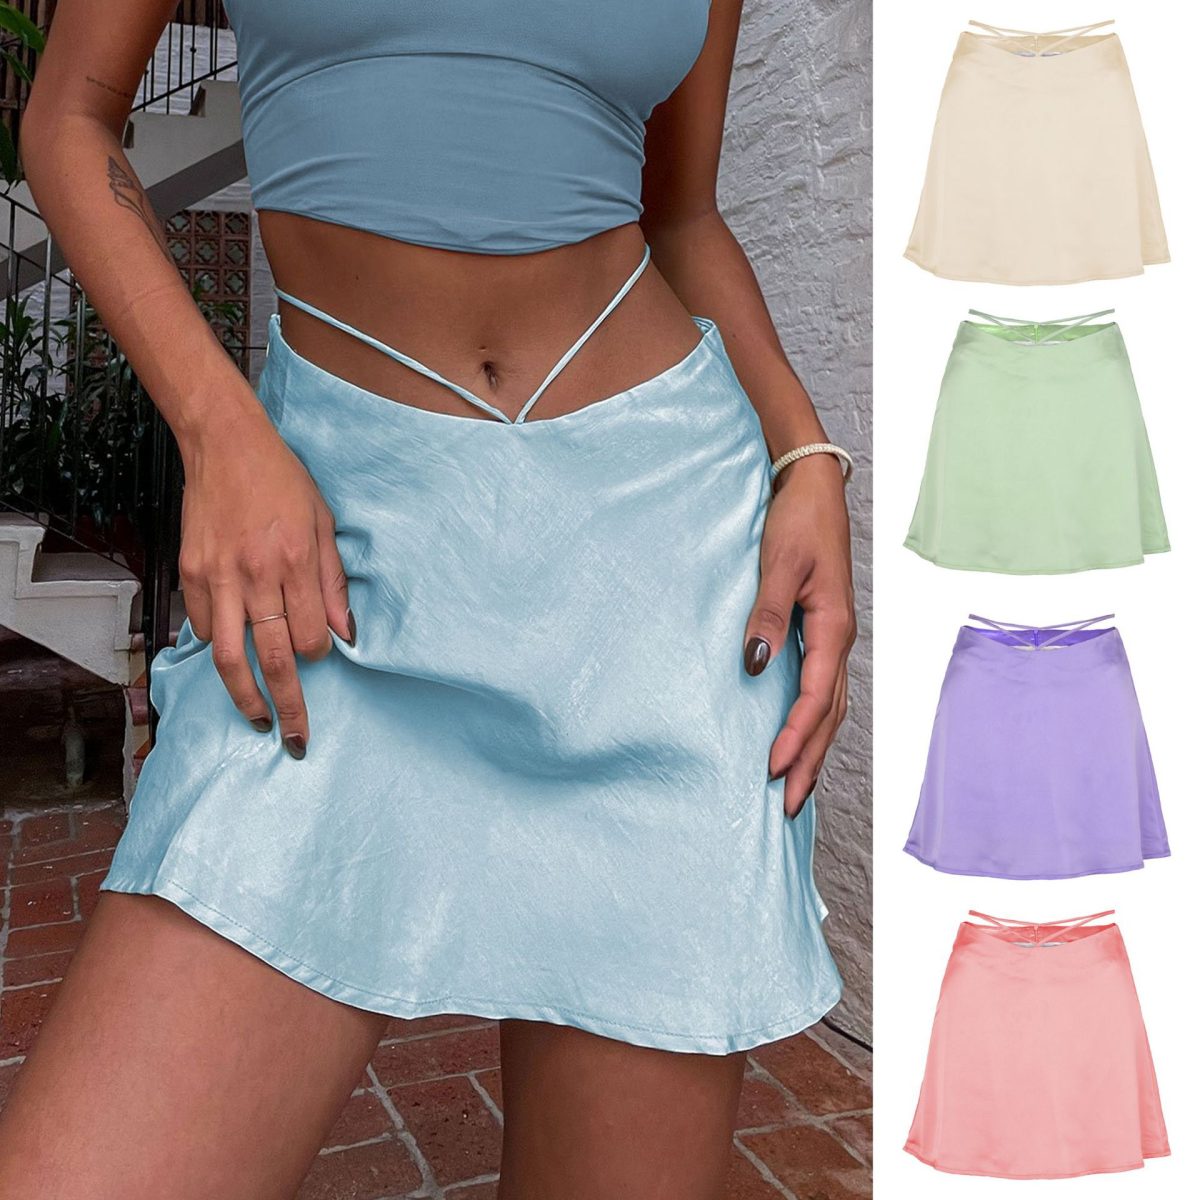 Cropped Lace-Up Skirt in Skirts